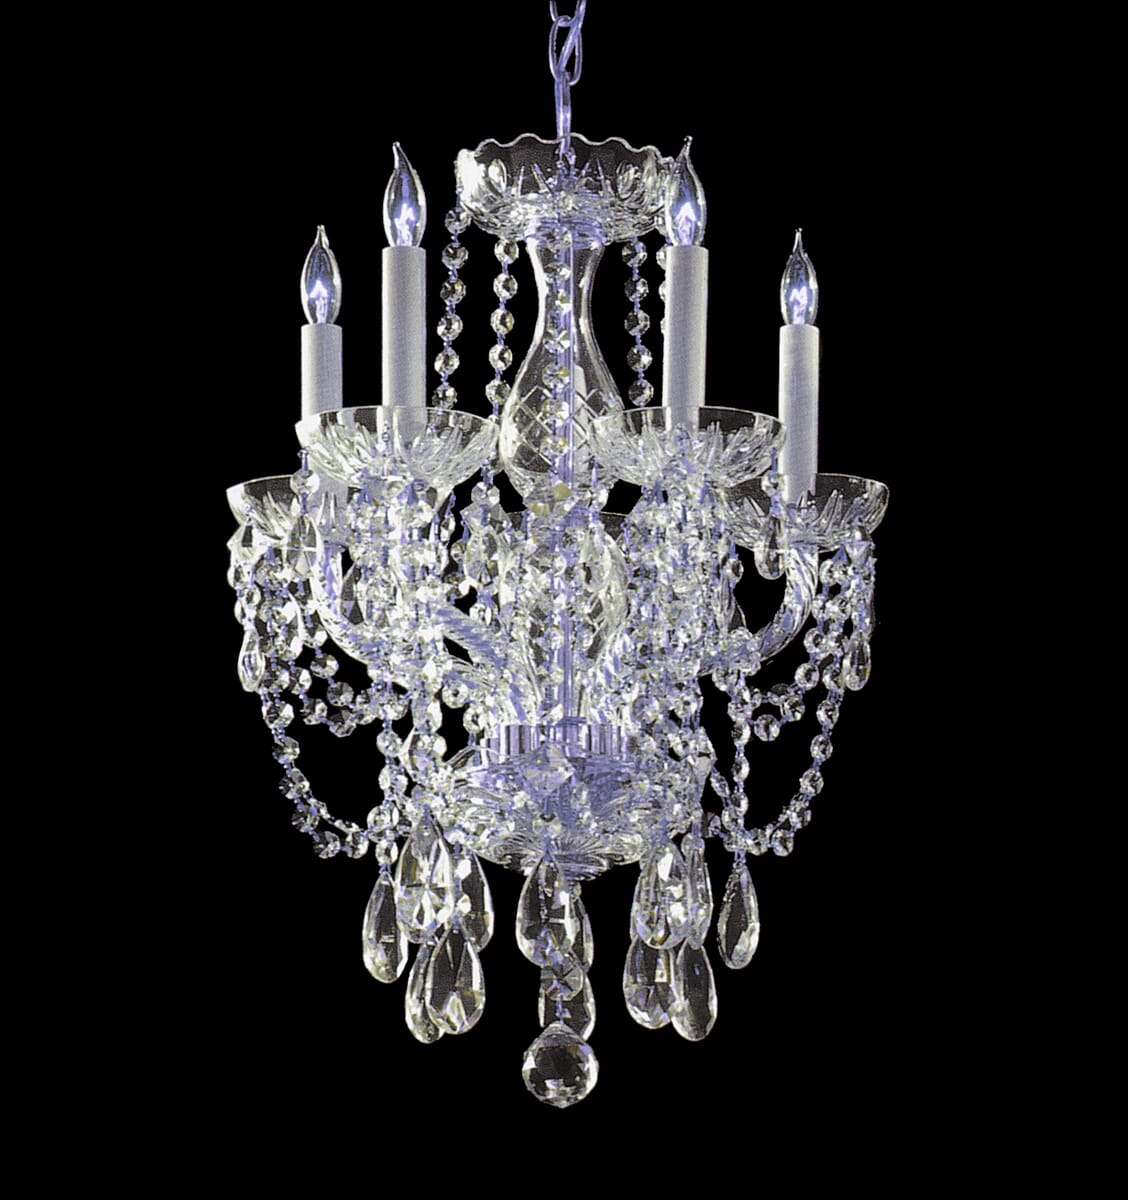 Traditional Crystal 5-Light 20"" Mini Chandelier in Polished Chrome with Clear Hand Cut Crystals -  Crystorama, 1129-CH-CL-MWP